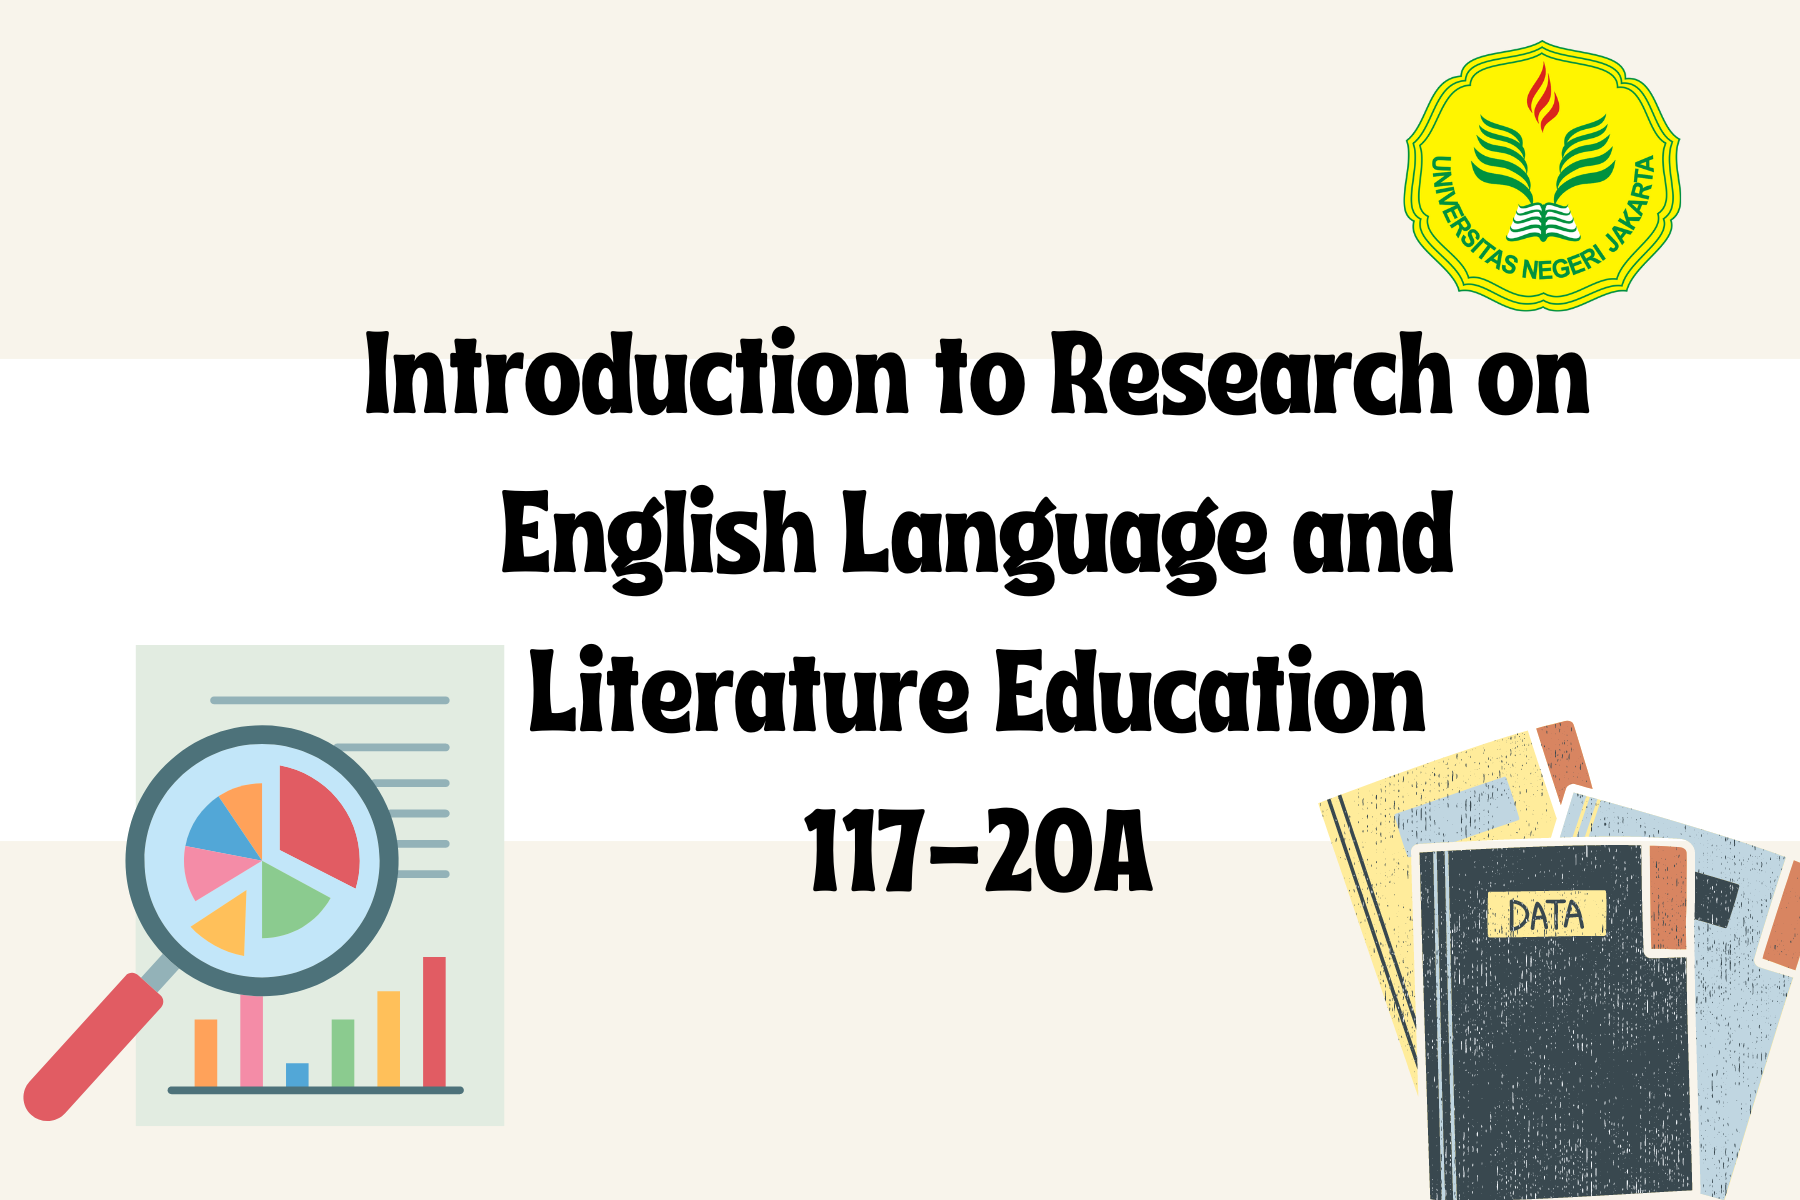 Introduction to Research on English Language and Literature Education (117-20A)